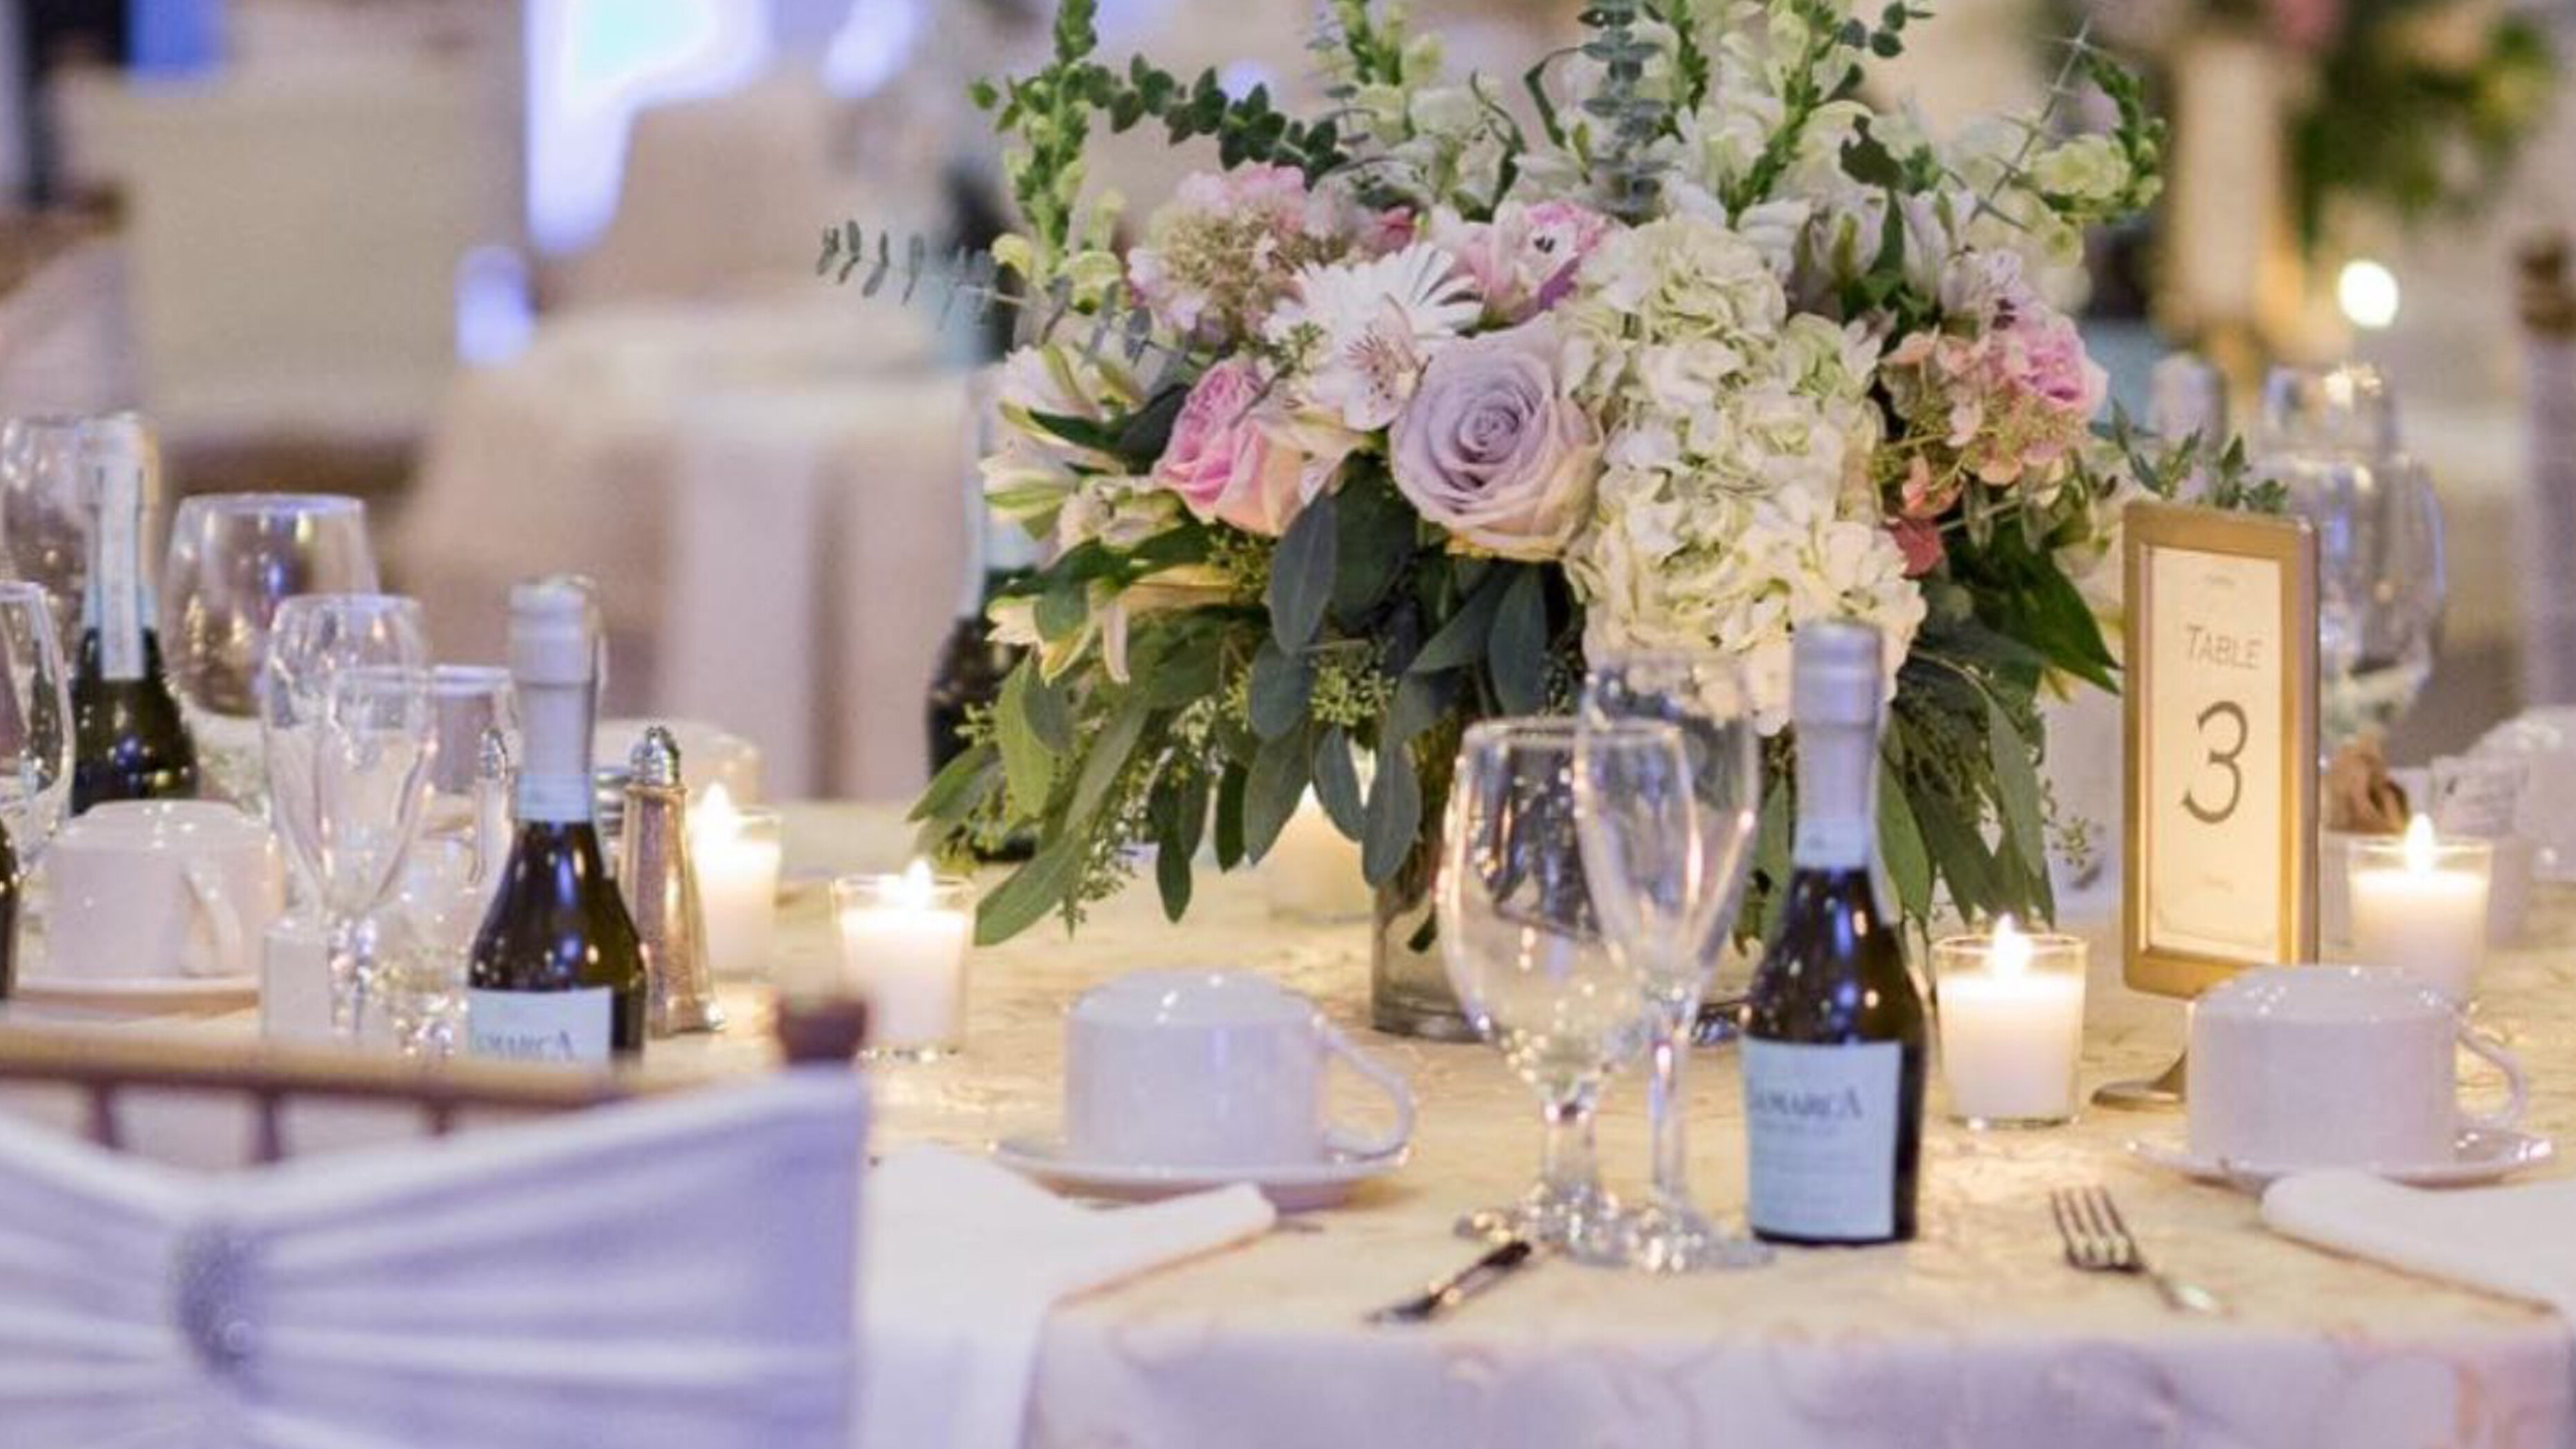 Table setting for wedding at The Grand Oak Villa in Oakville, CT